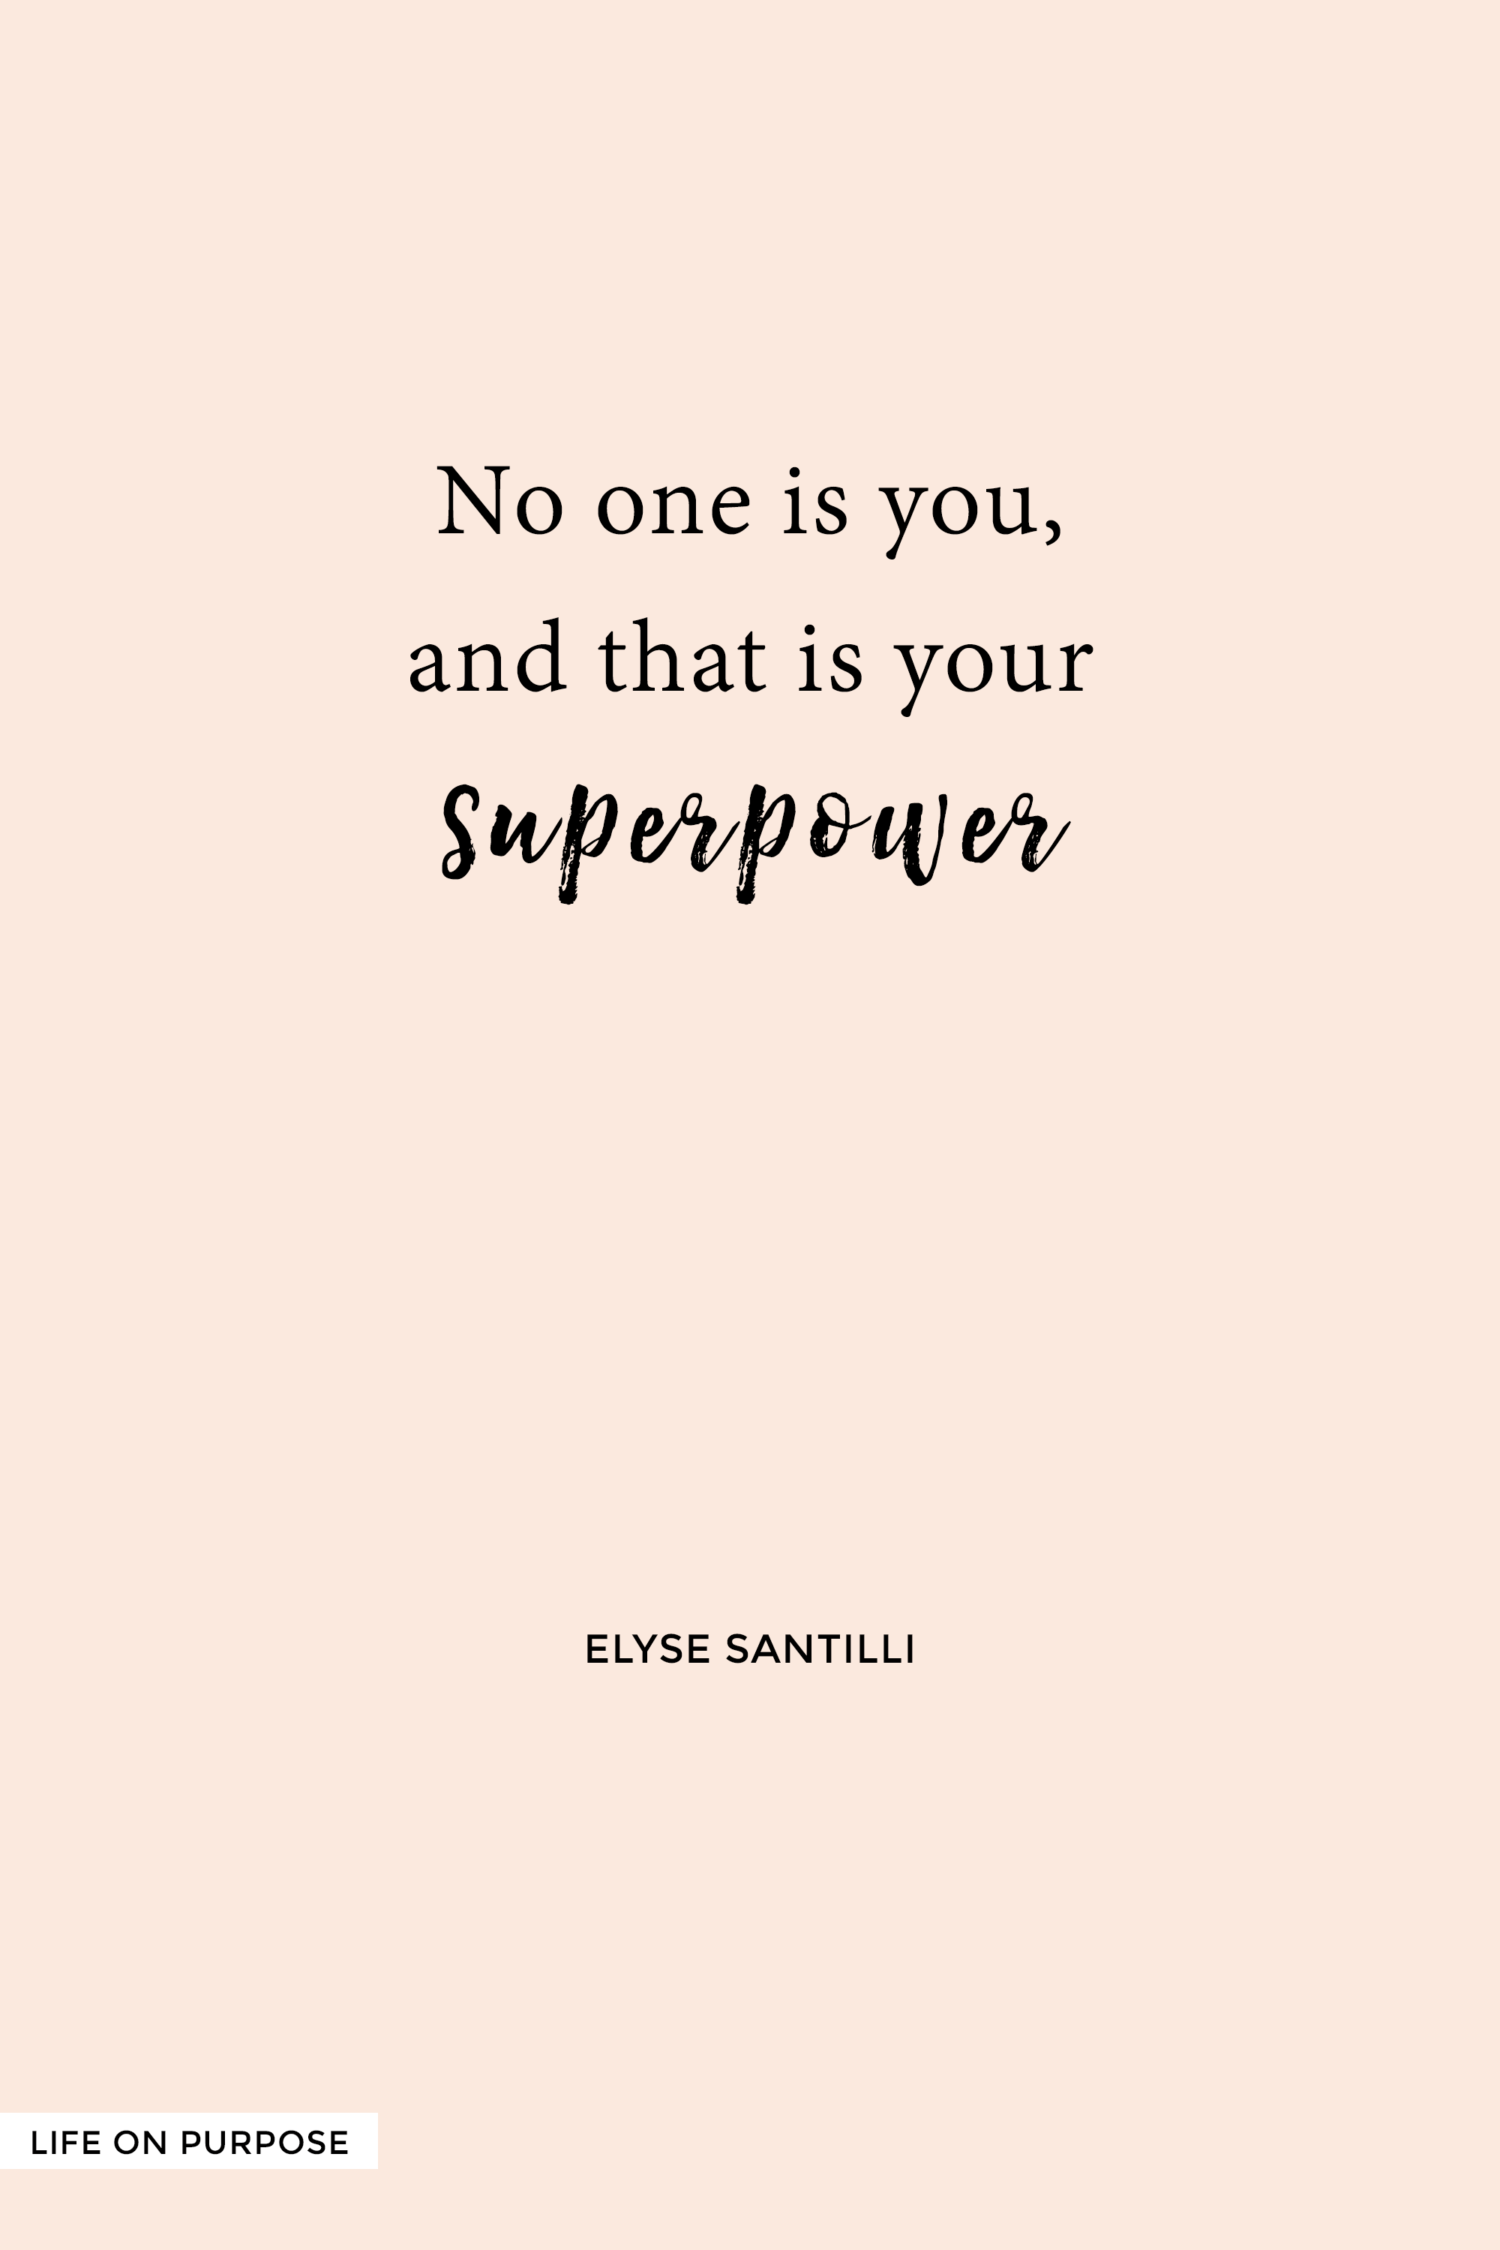 No one is you, and THAT is your superpower. 14 inspiring quotes for women  doing life on purpose! - The Life On Purpose Movement